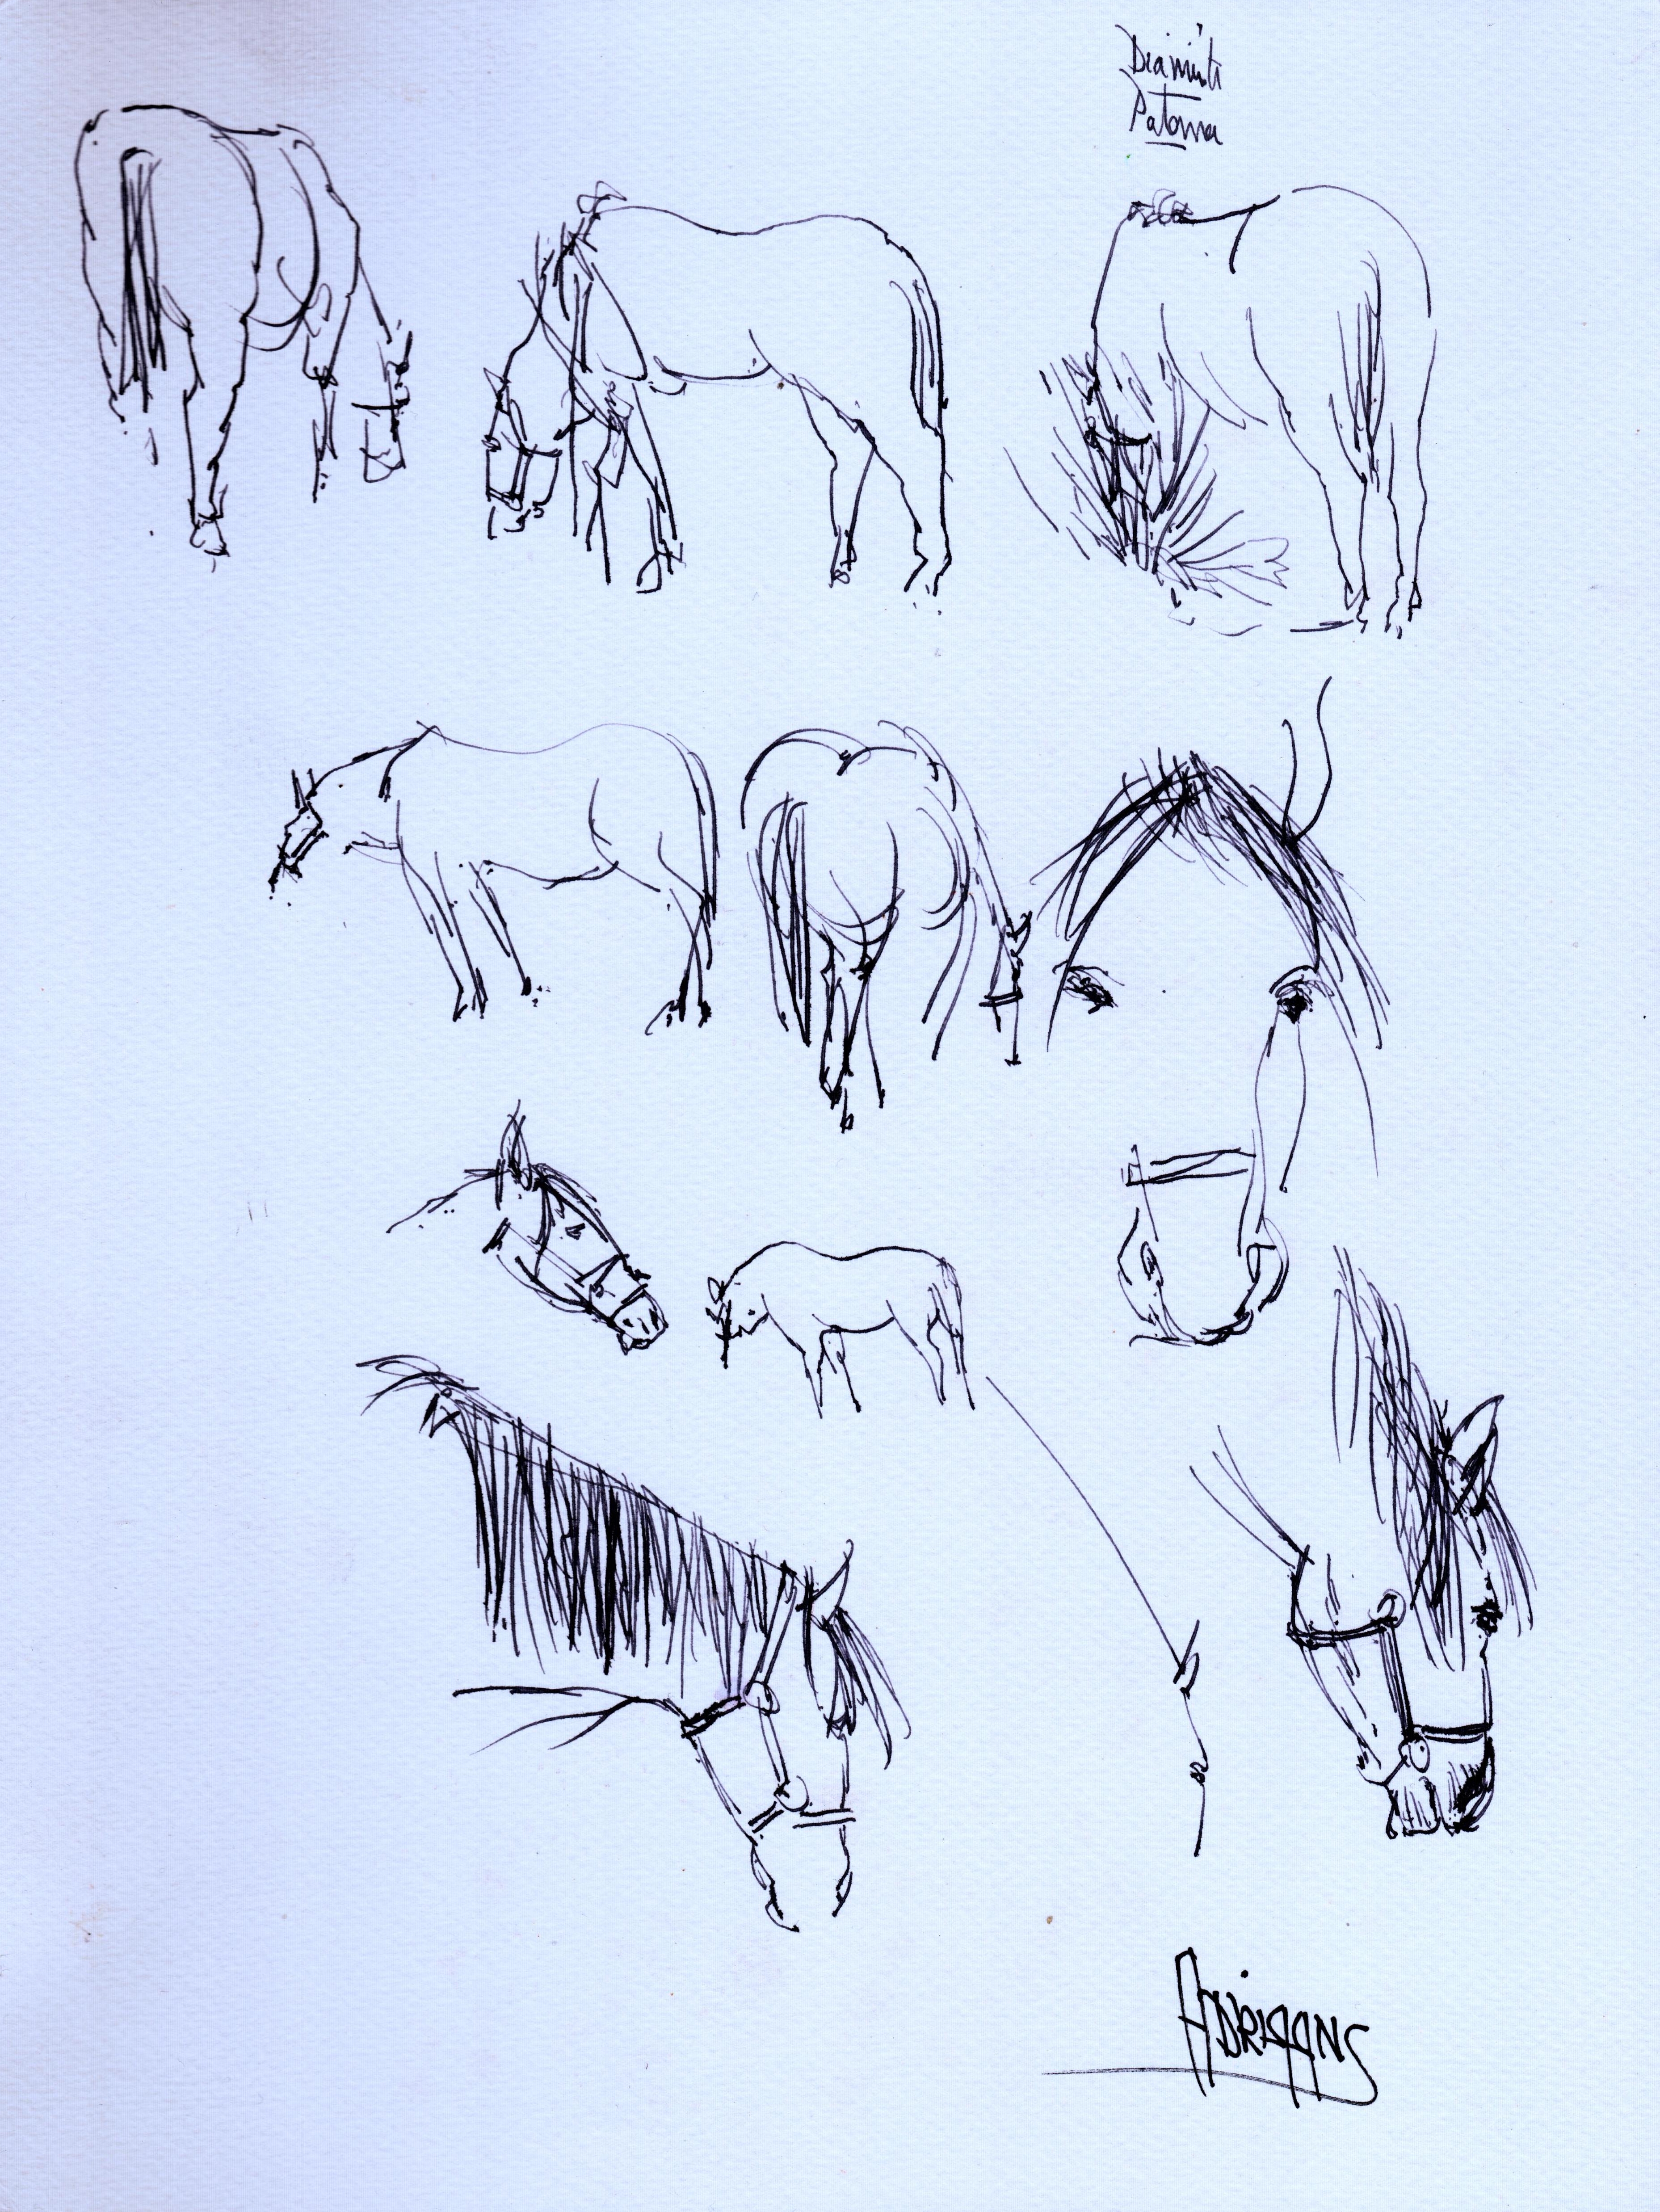 My neighbour José always has some horses that travel from meadow to meadow. One morning I made some sketches.